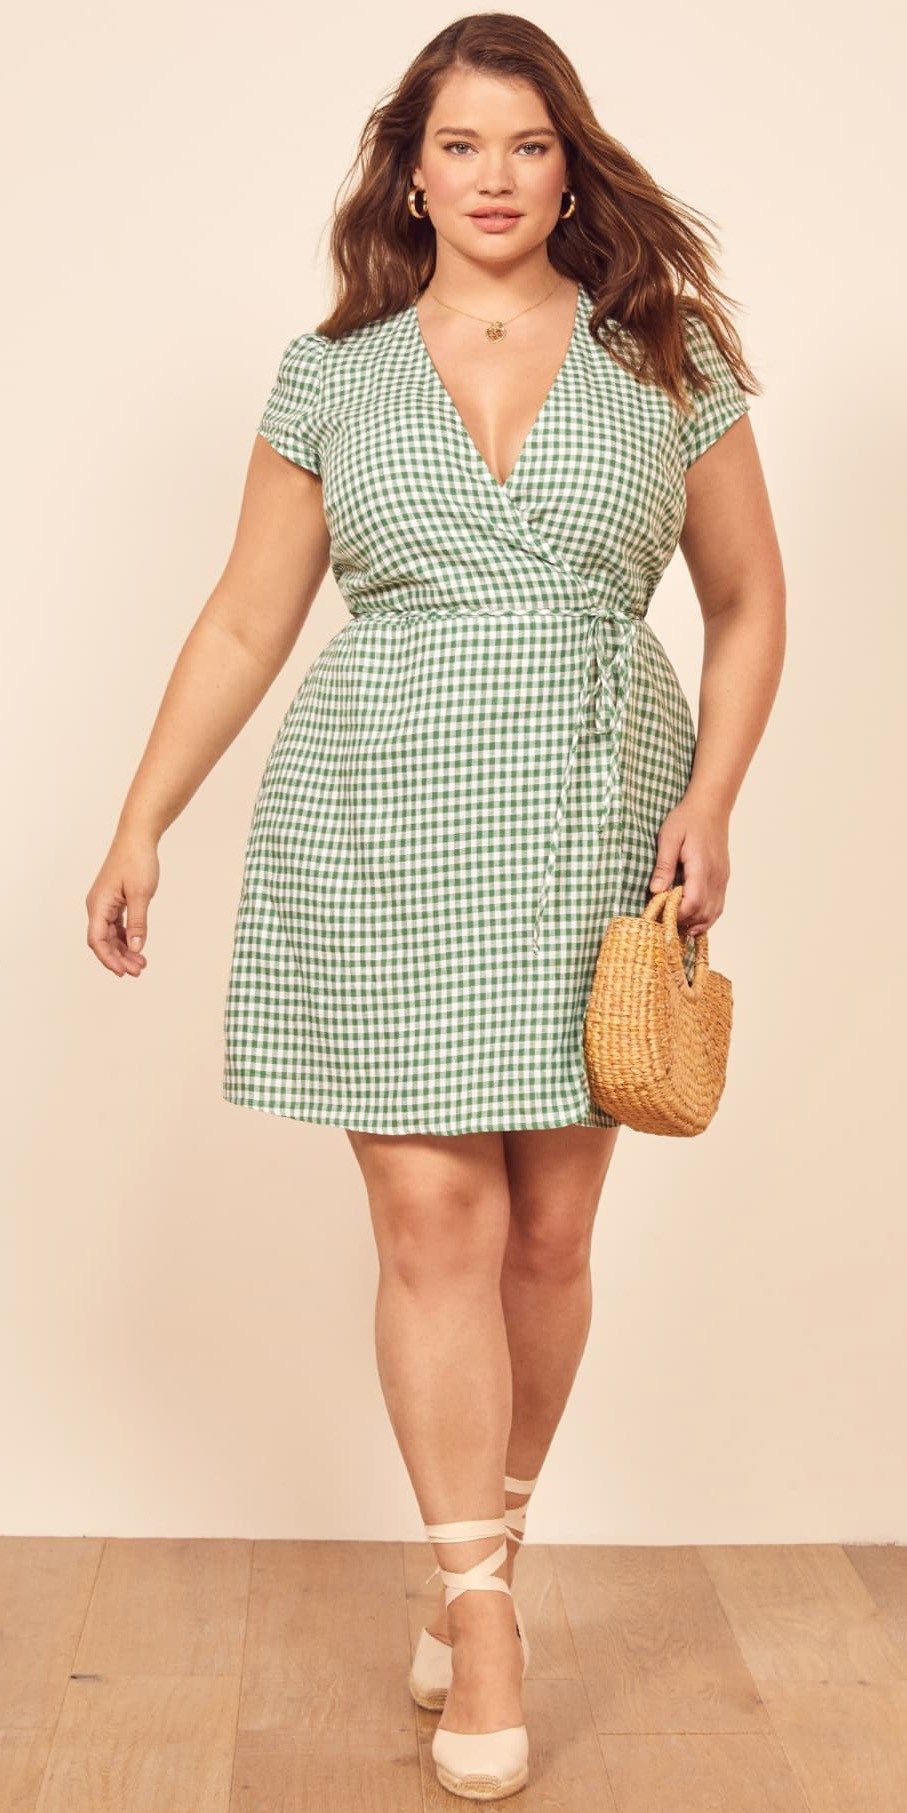 Flattering Plus Size Dresses: Embracing Every Curve with Confidence